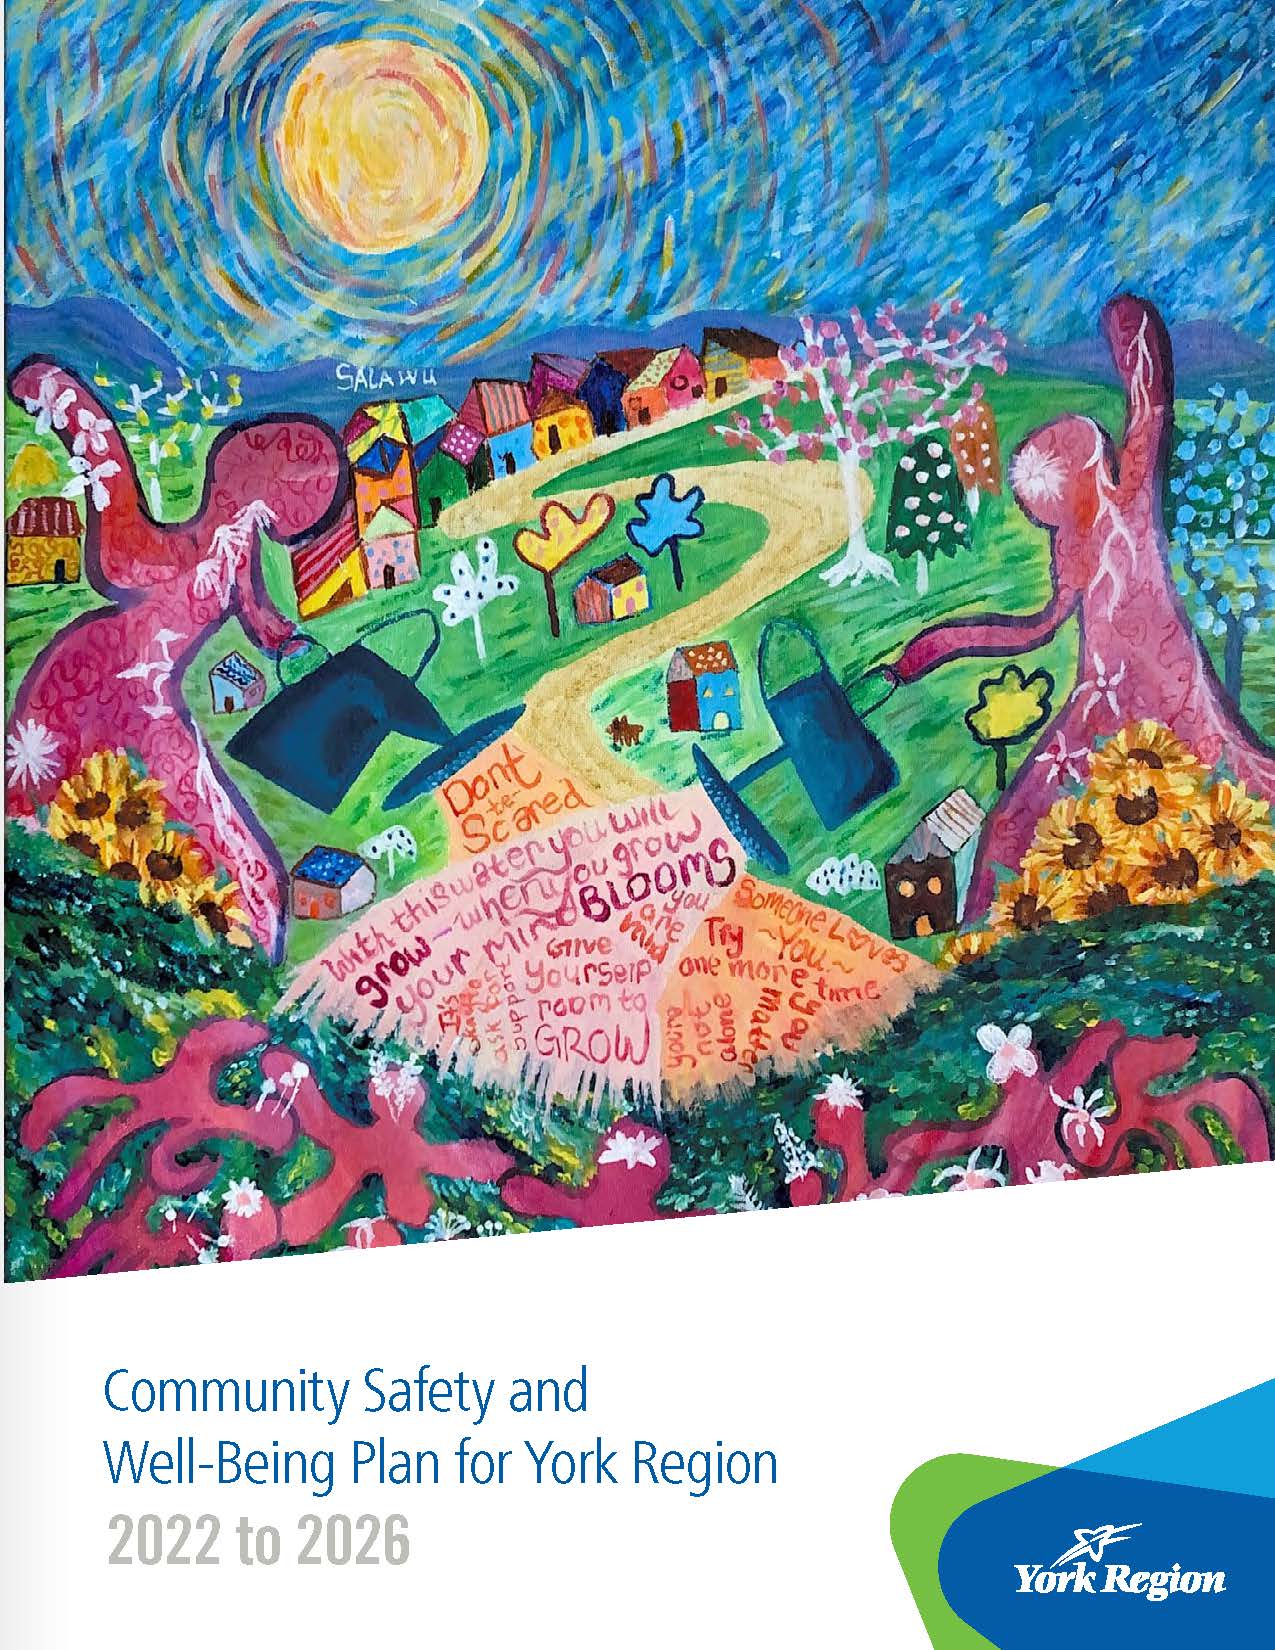 Cover page of the Community Safety and Well-Being Plan